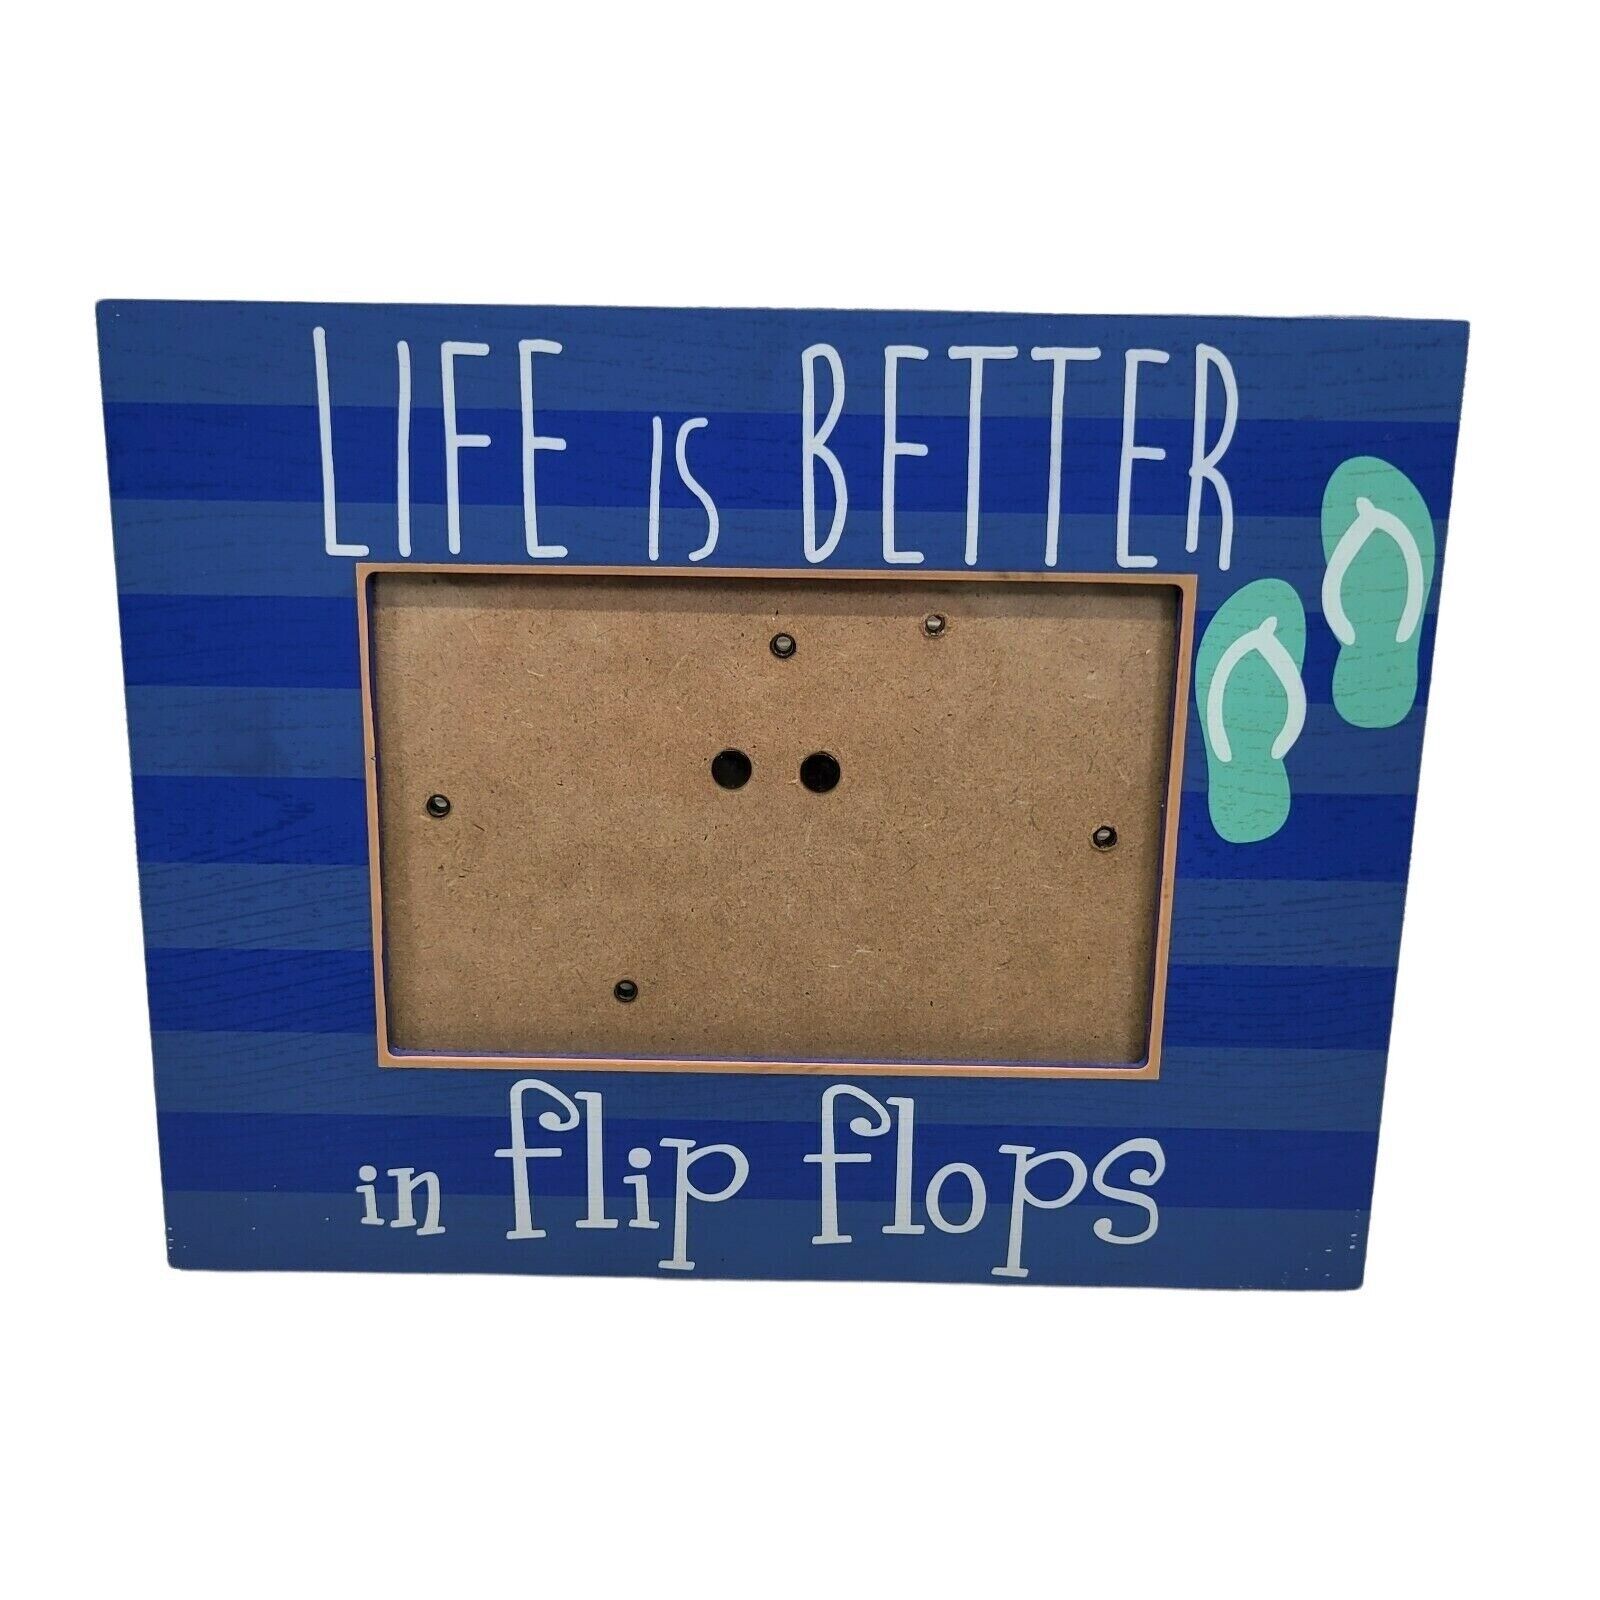 Life is Better Flip Flops Photo Picture Frame Summer Beach Blue Vacation Tiki - $9.99